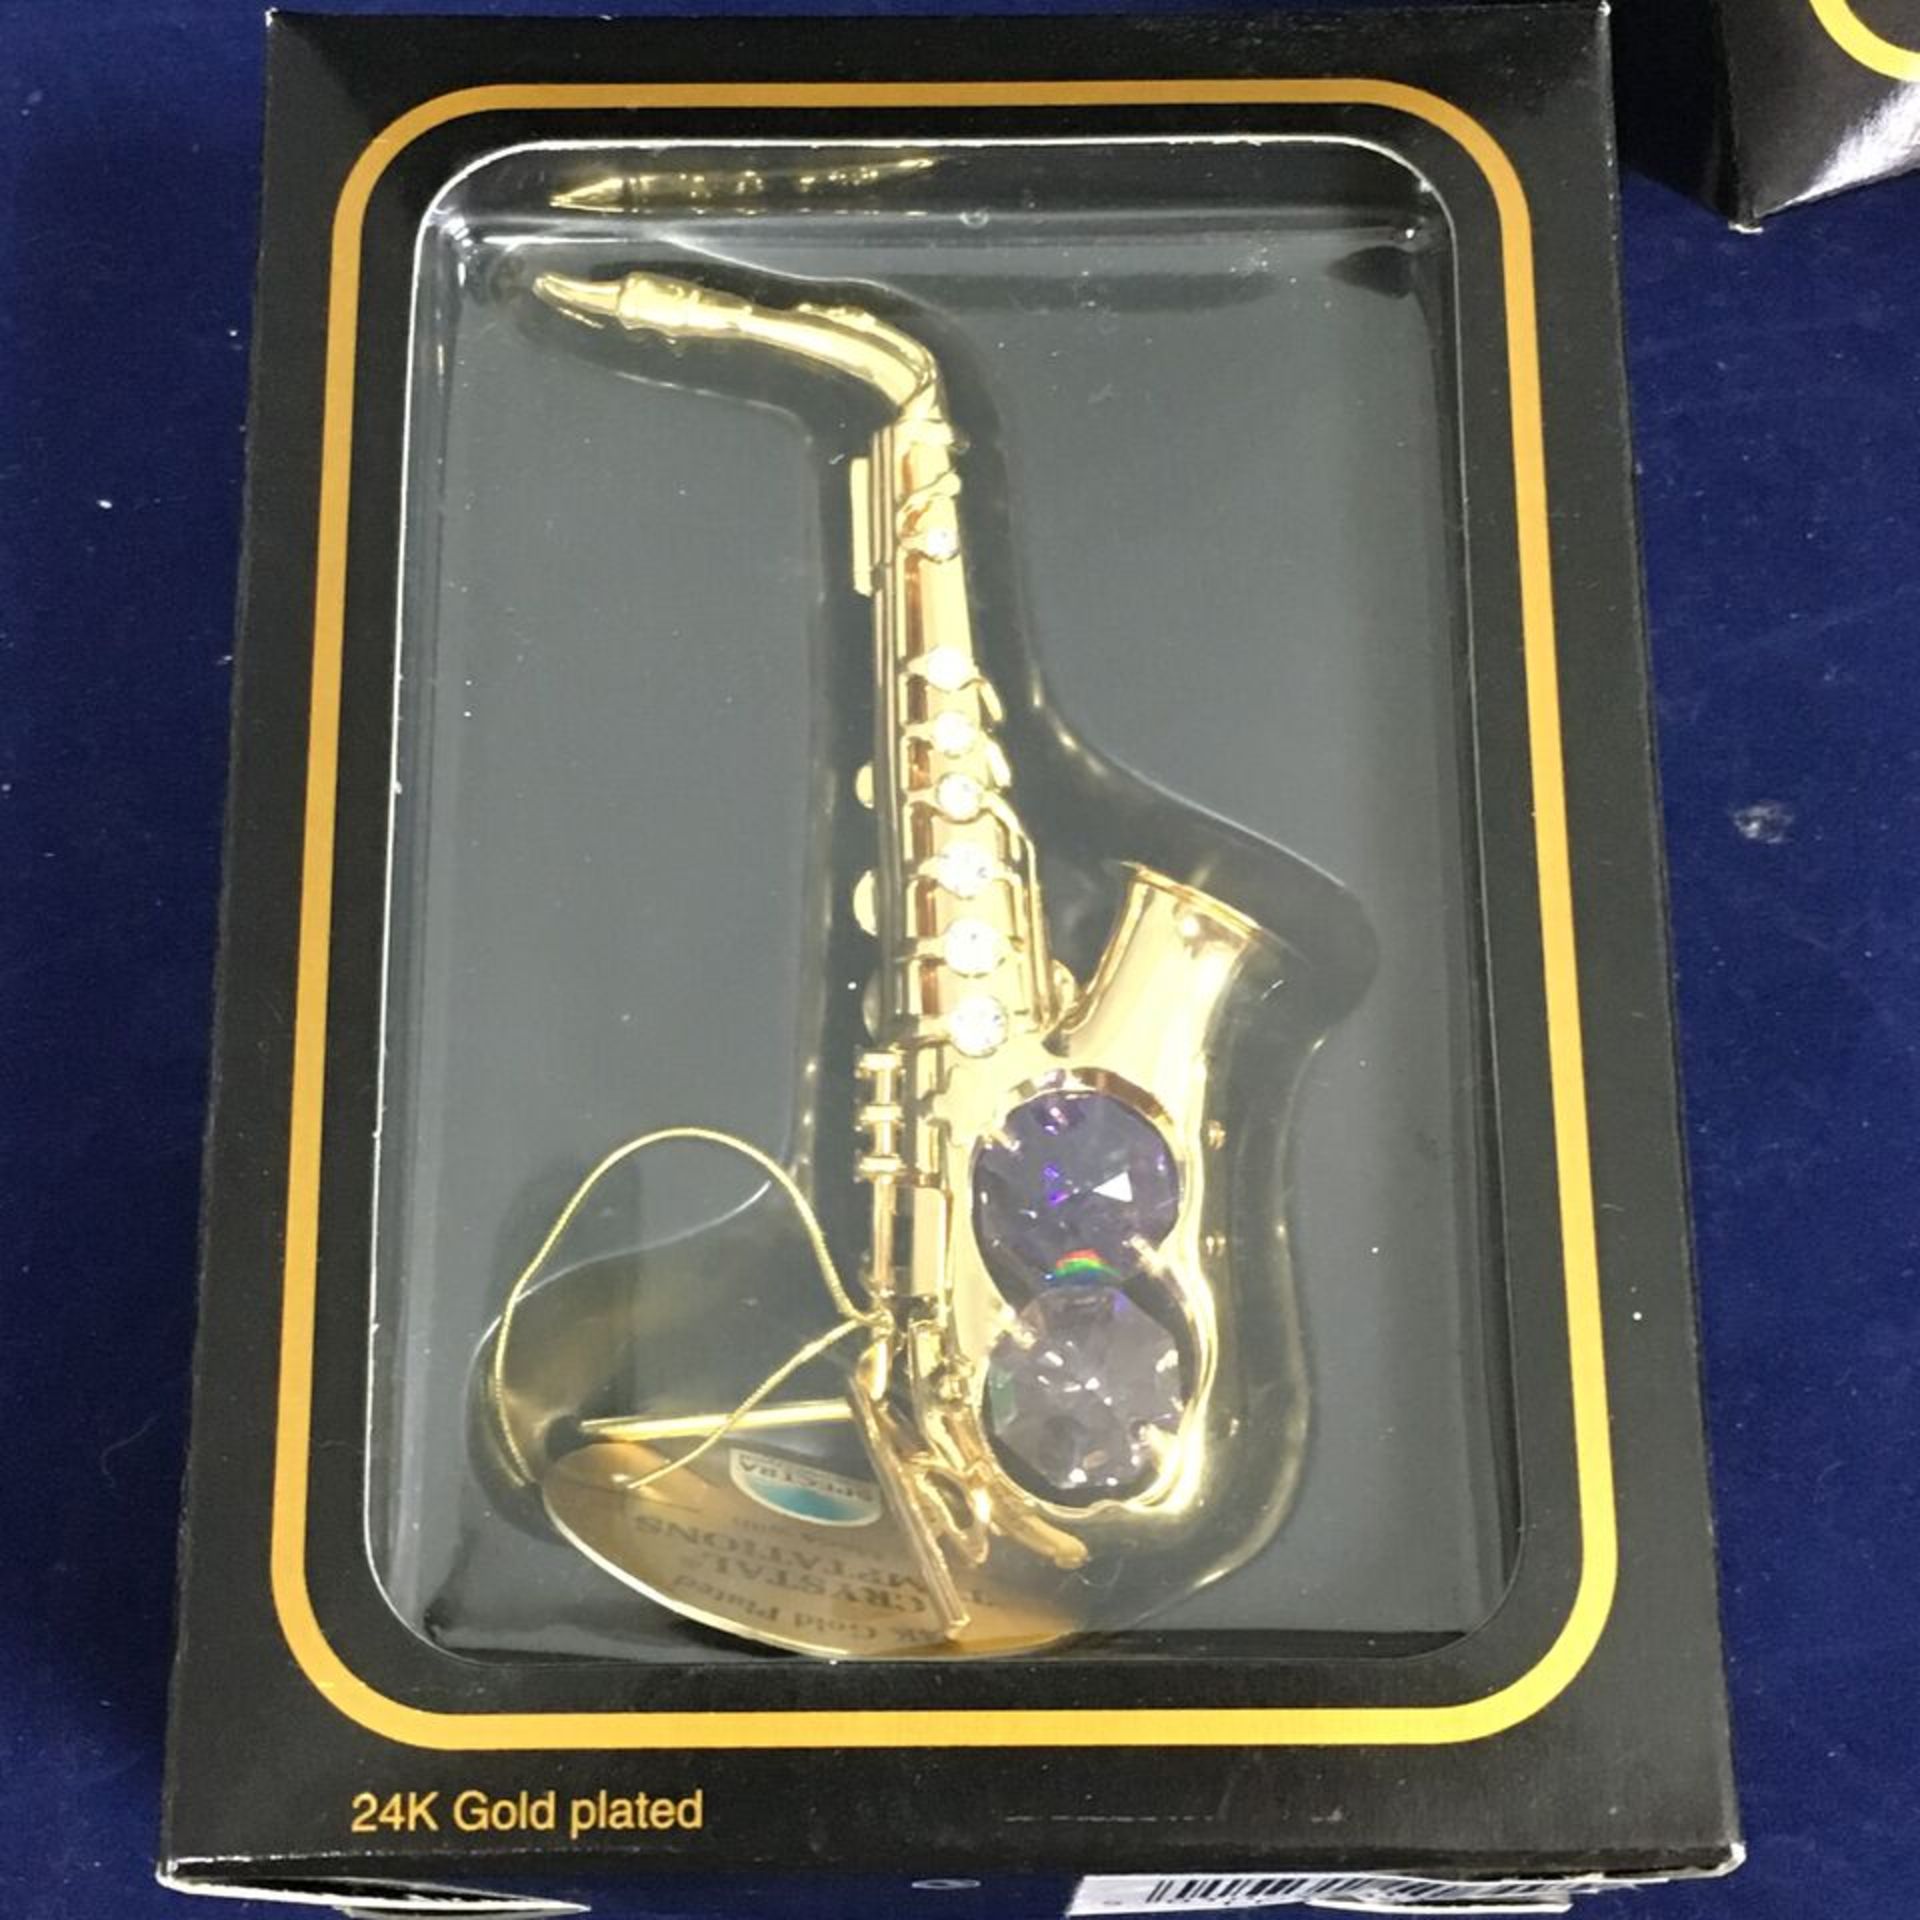 BRAND NEW (WHOLESALE CLEARANCE) 5 BOXED 24K GOLD PLATED WITH SWAROVSKI CRYSTAL SAXAPHONE. FREE UK - Image 2 of 2